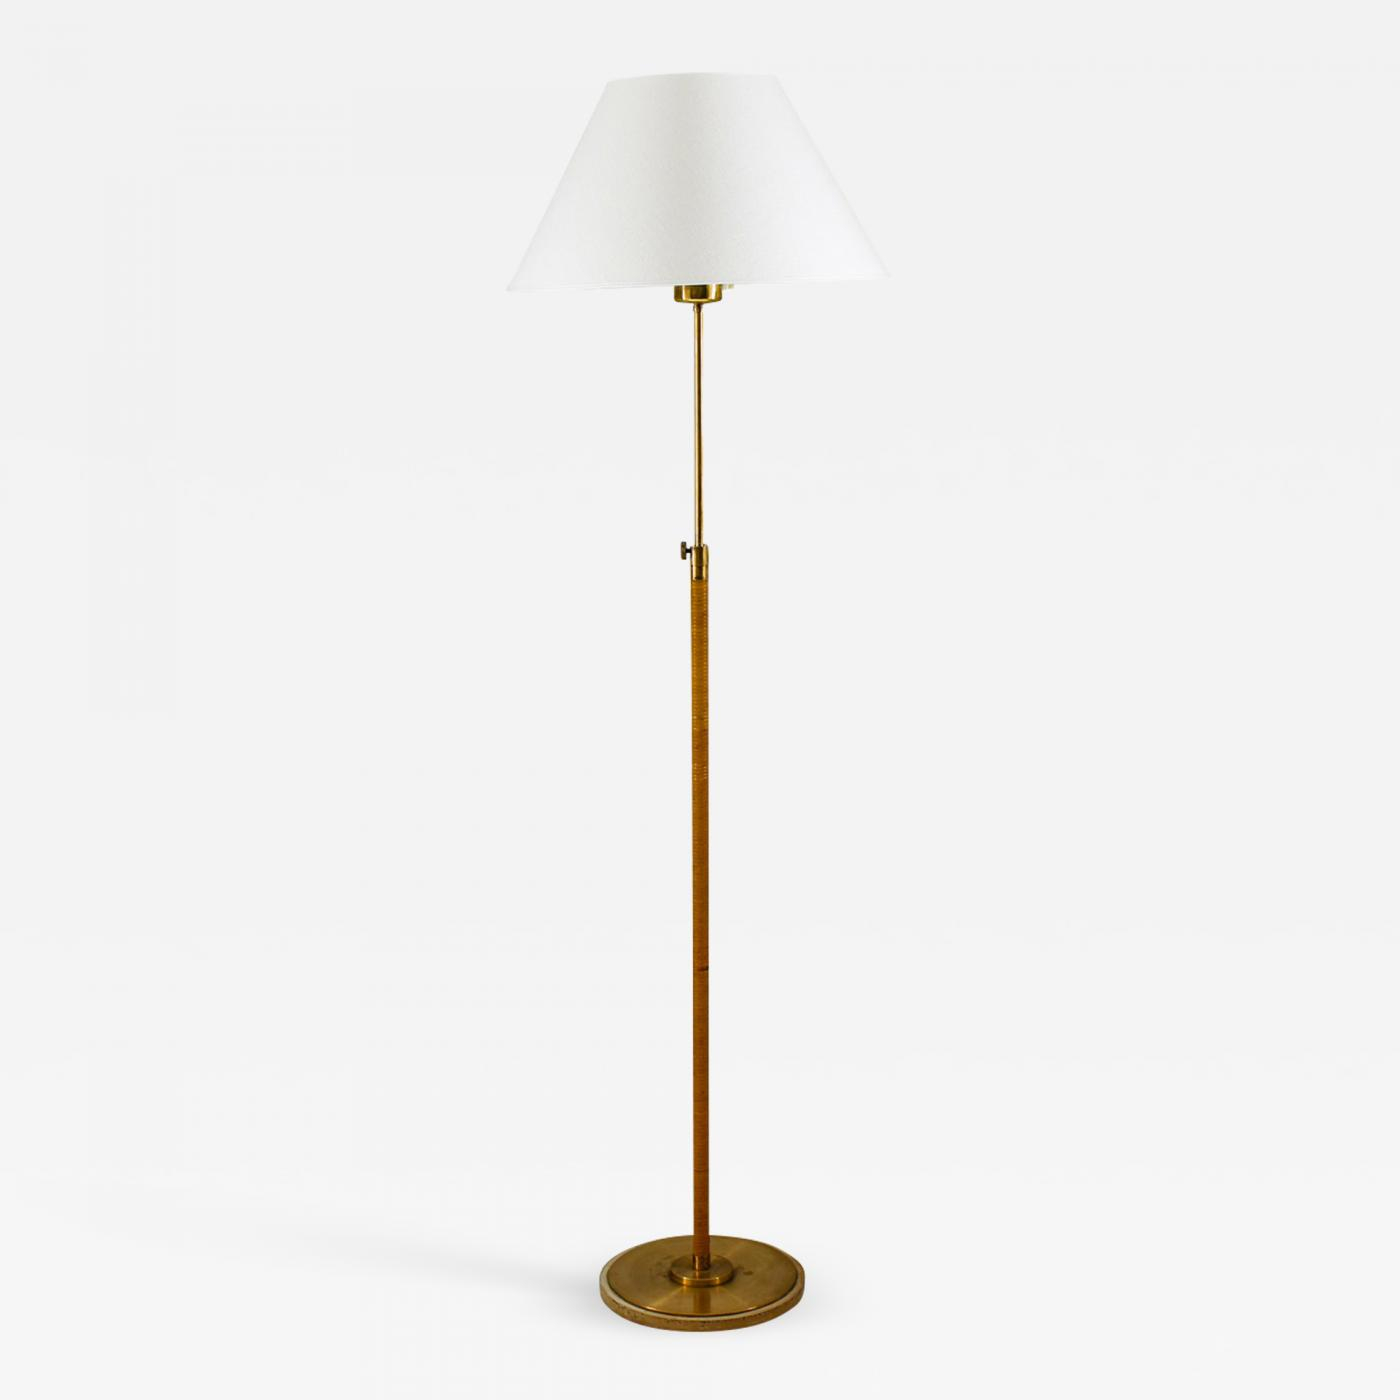 Swedish Modern Midcentury Floor Lamp In Brass And Rattan 1940s throughout size 1400 X 1400